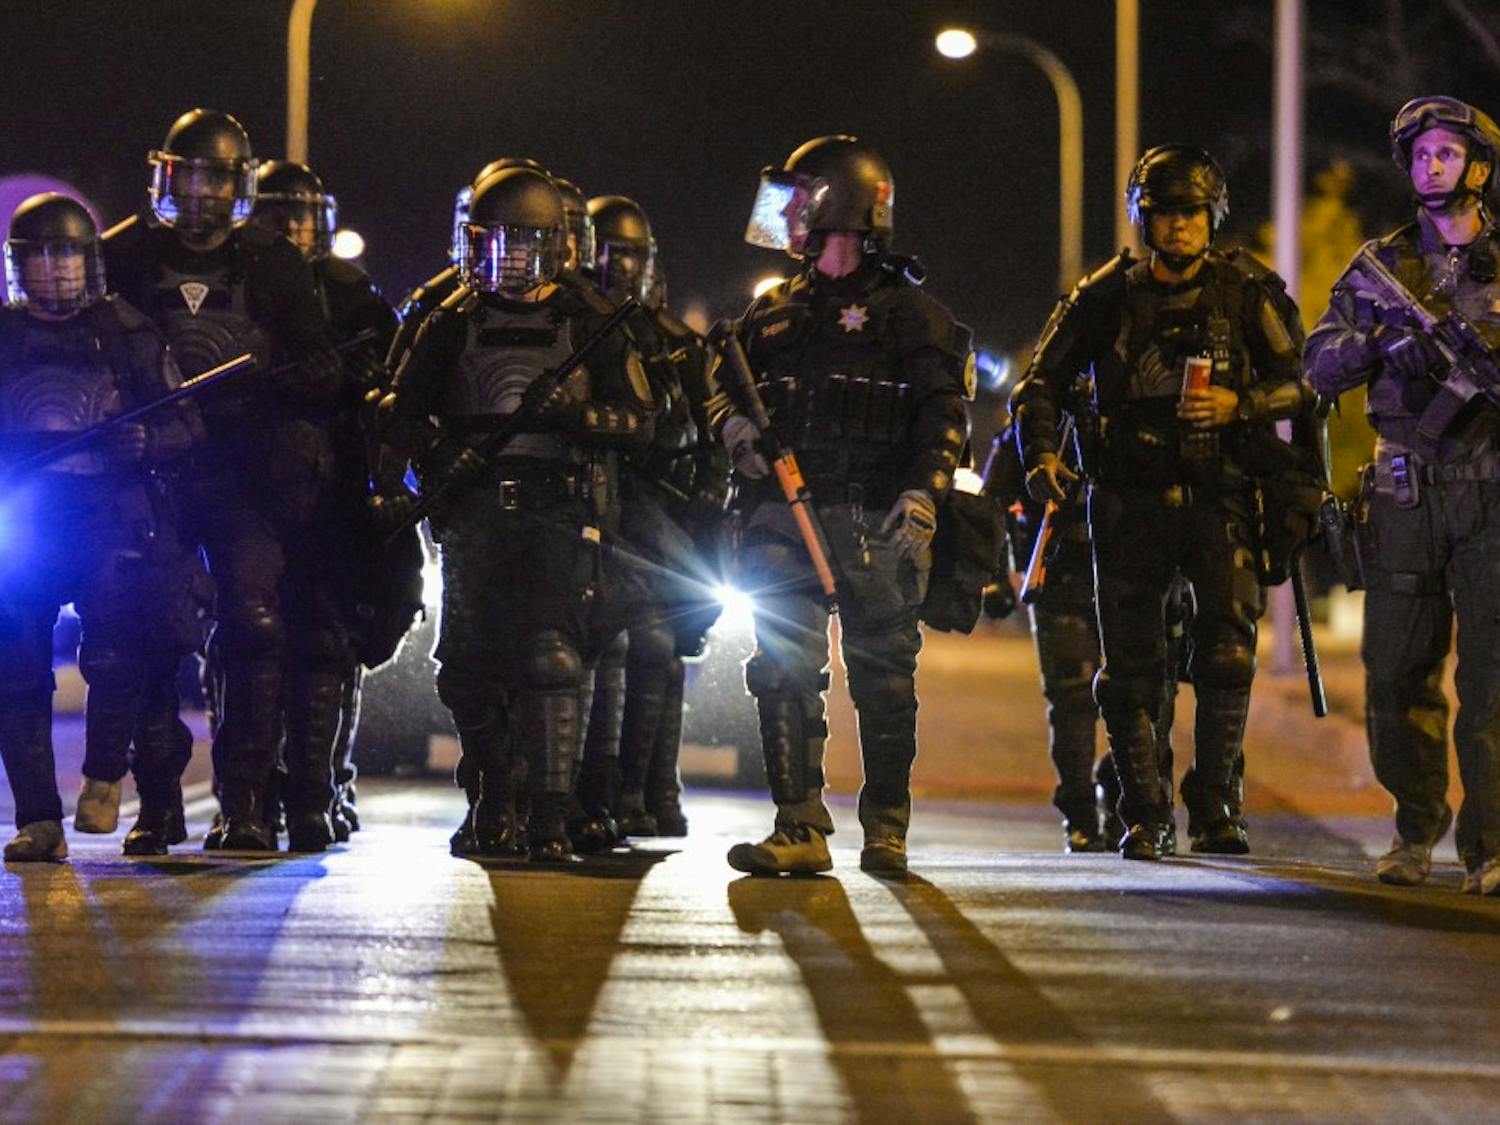 Albuquerque riot police march down 5th street Wednesday Oct. 12, 2016 in downtown Albuquerque. Riot police along with SWAT units where dispatched to a protest regarding the mistrial decision in the two police officers who shot James Boyd.&nbsp;